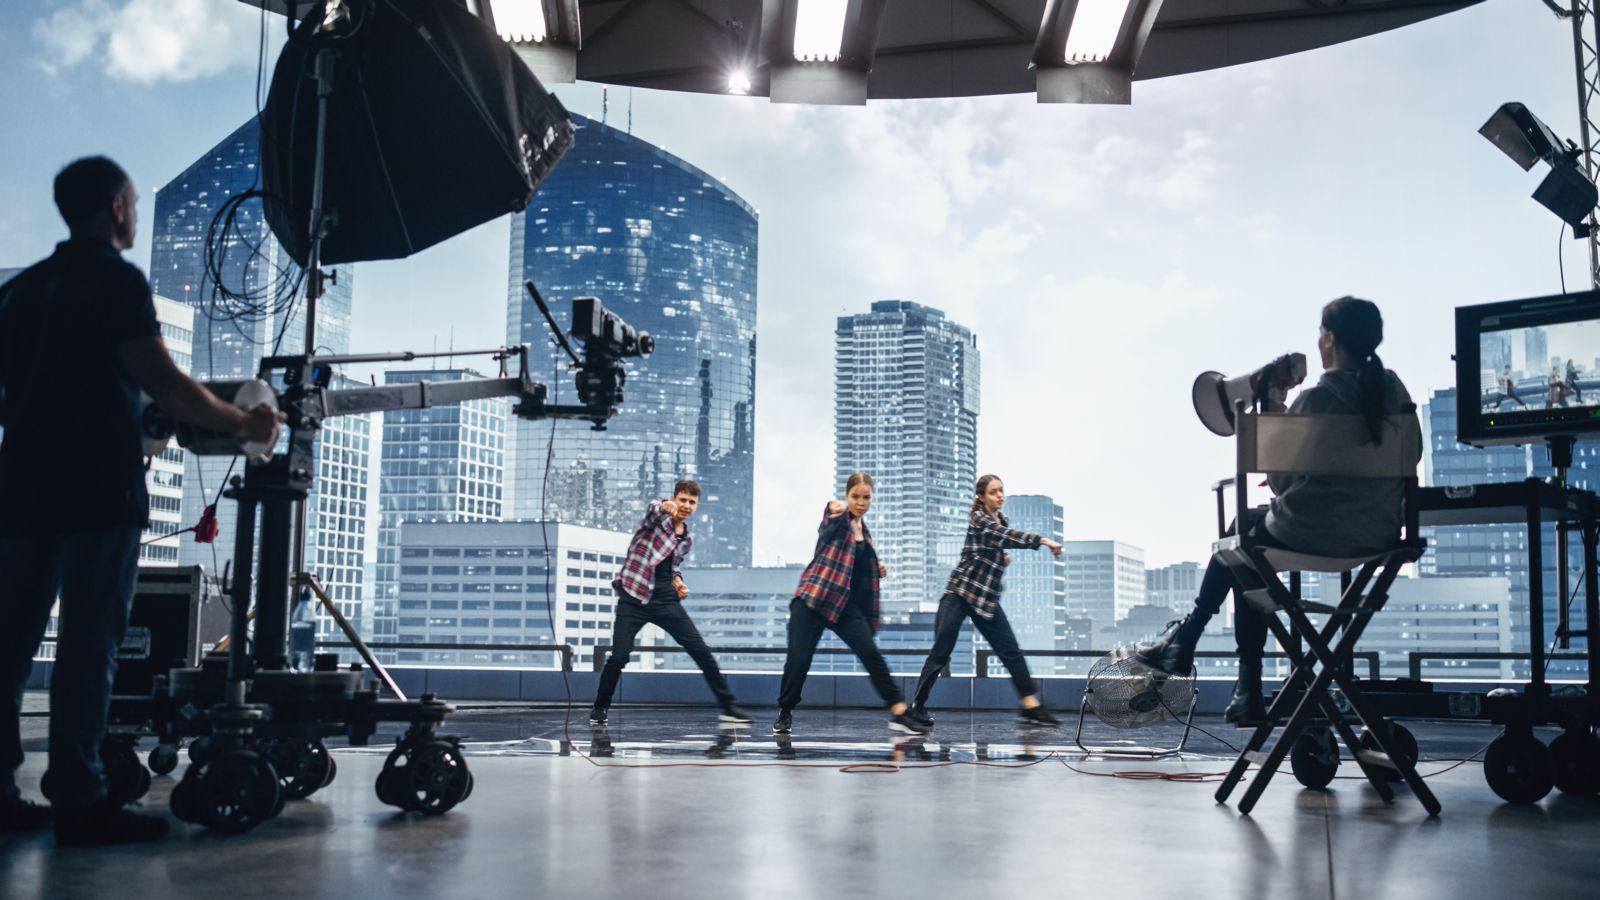 Three dancers are being filmed against a city backdrop in the background with a director, film crew, and equipment in the foreground.